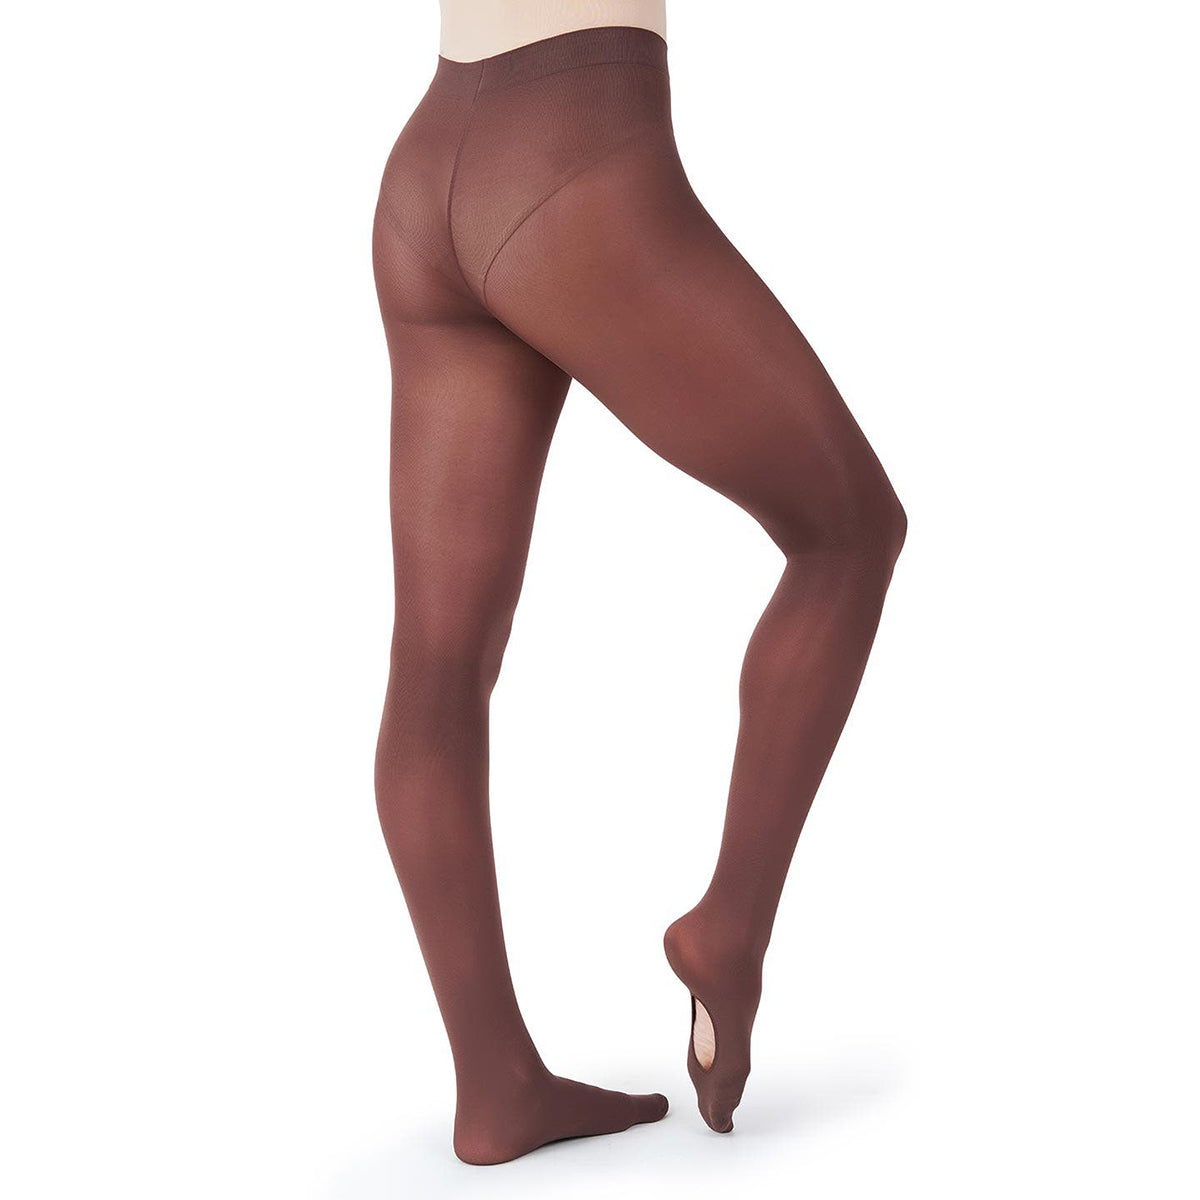 CAPEZIO 1917 FOOTLESS TIGHTS WITH SELF KNIT WAIST BAND – Fanci